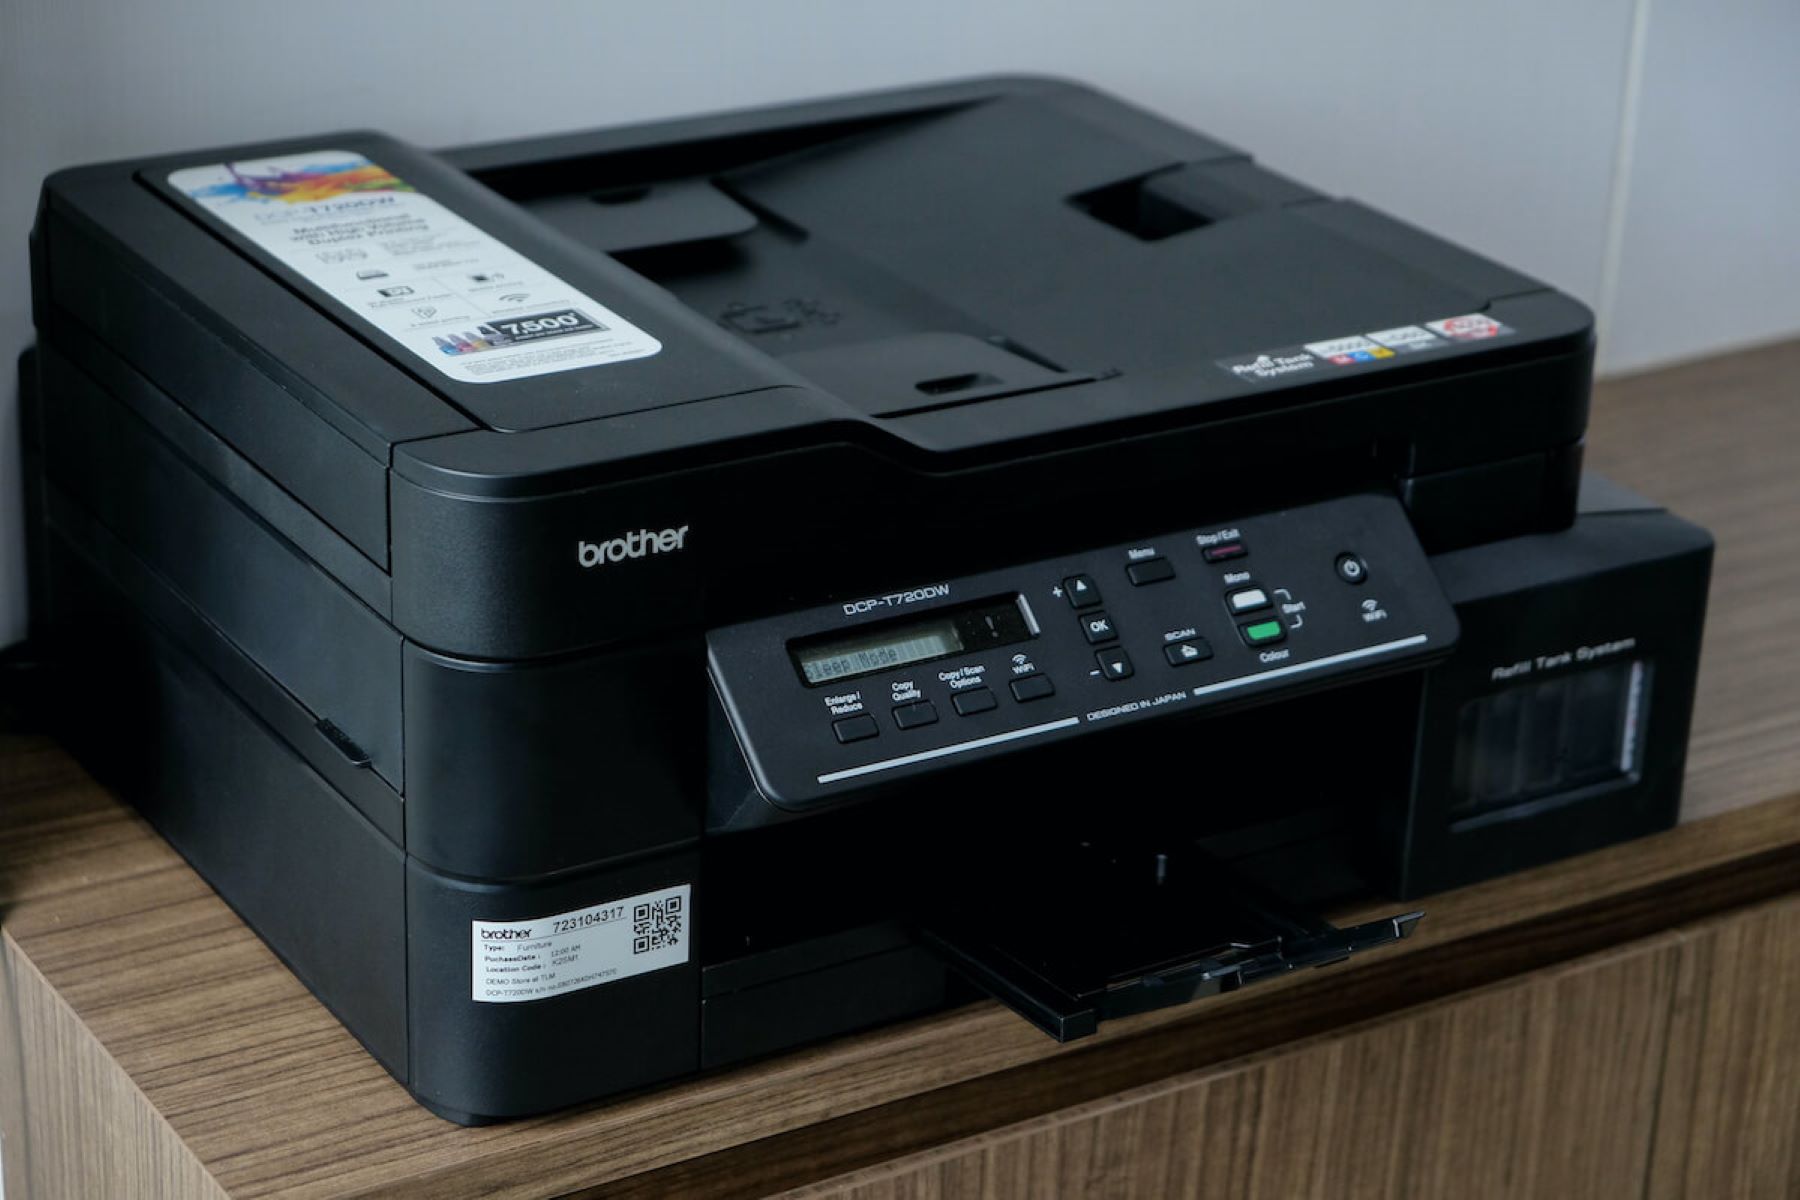 Setting Up Printer With Mobile Hotspot: Step-by-Step Guide